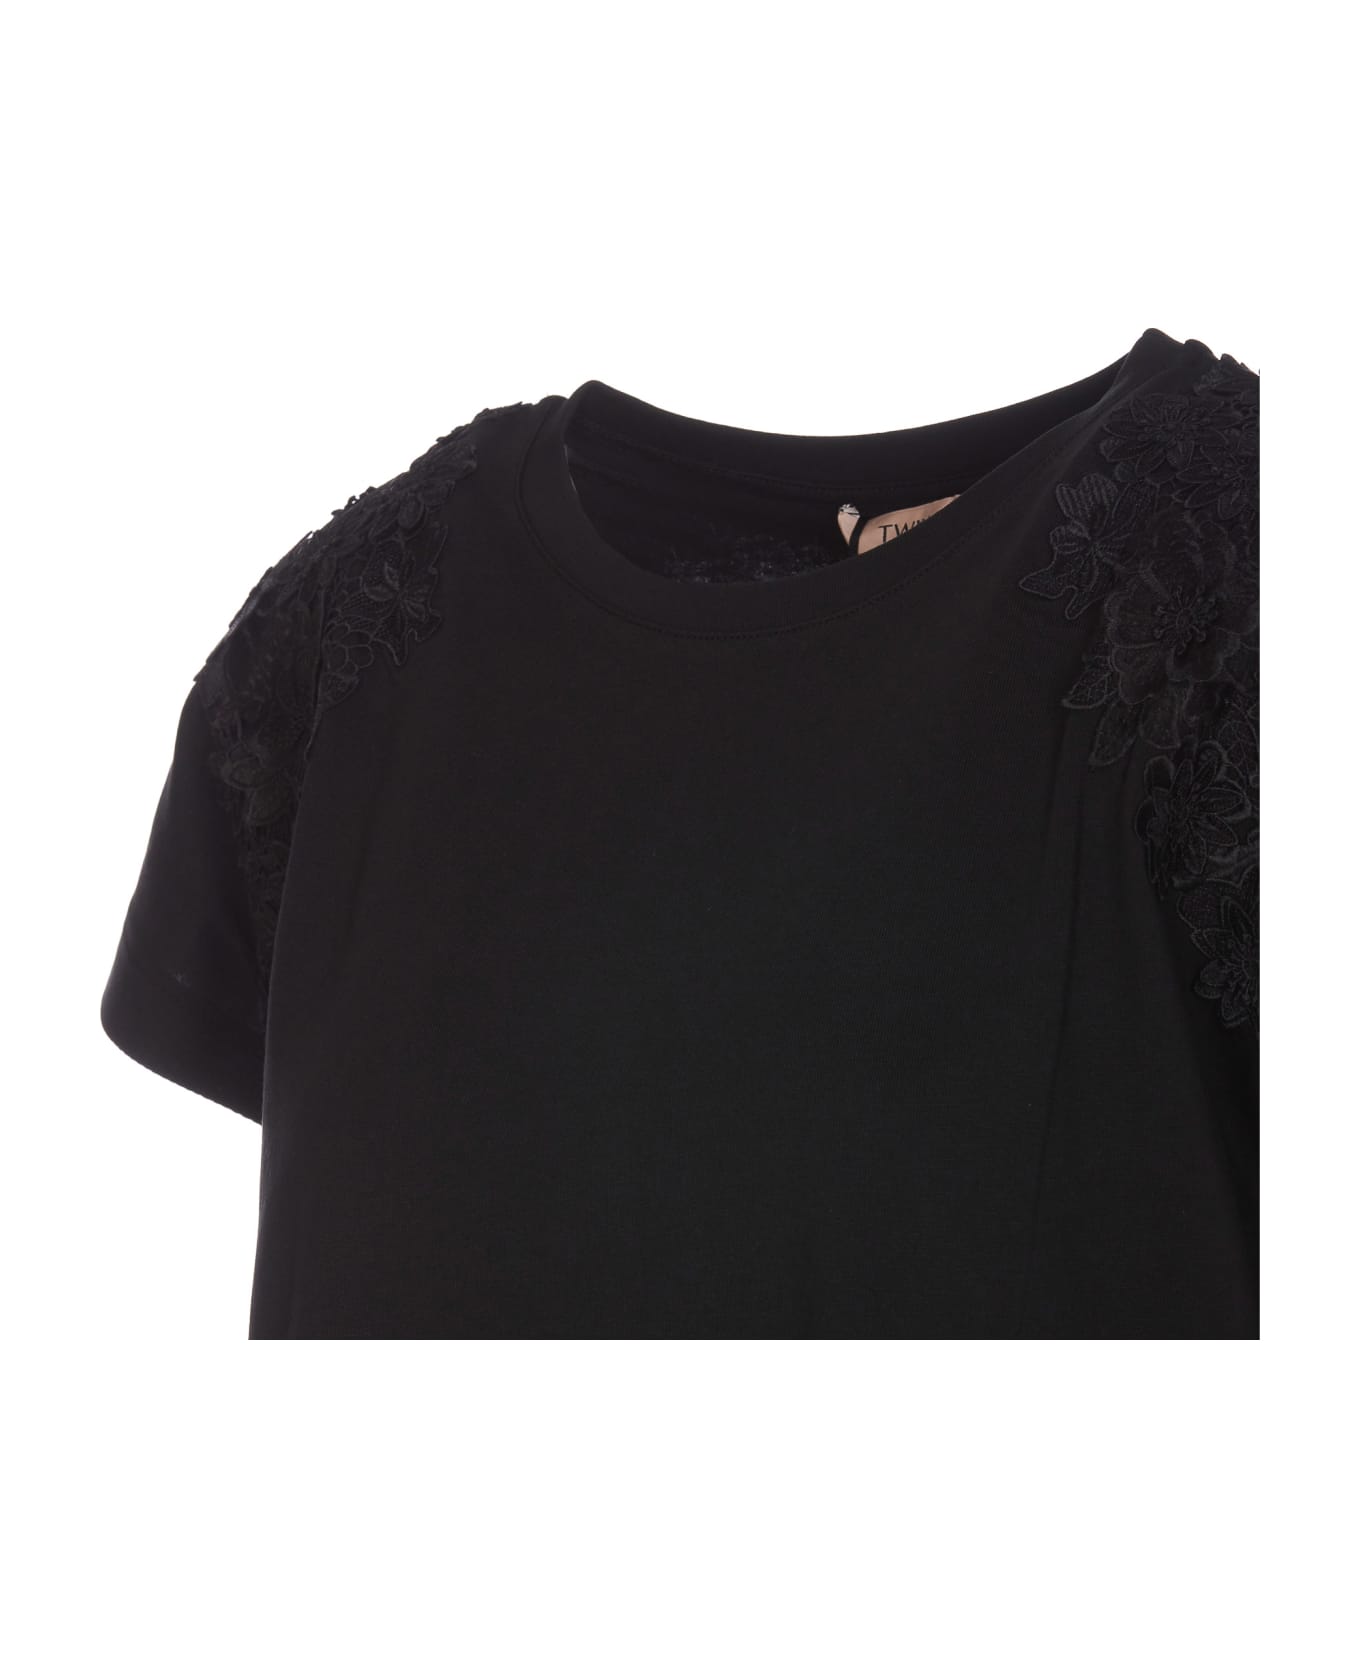 TwinSet T-shirt With Lace Details